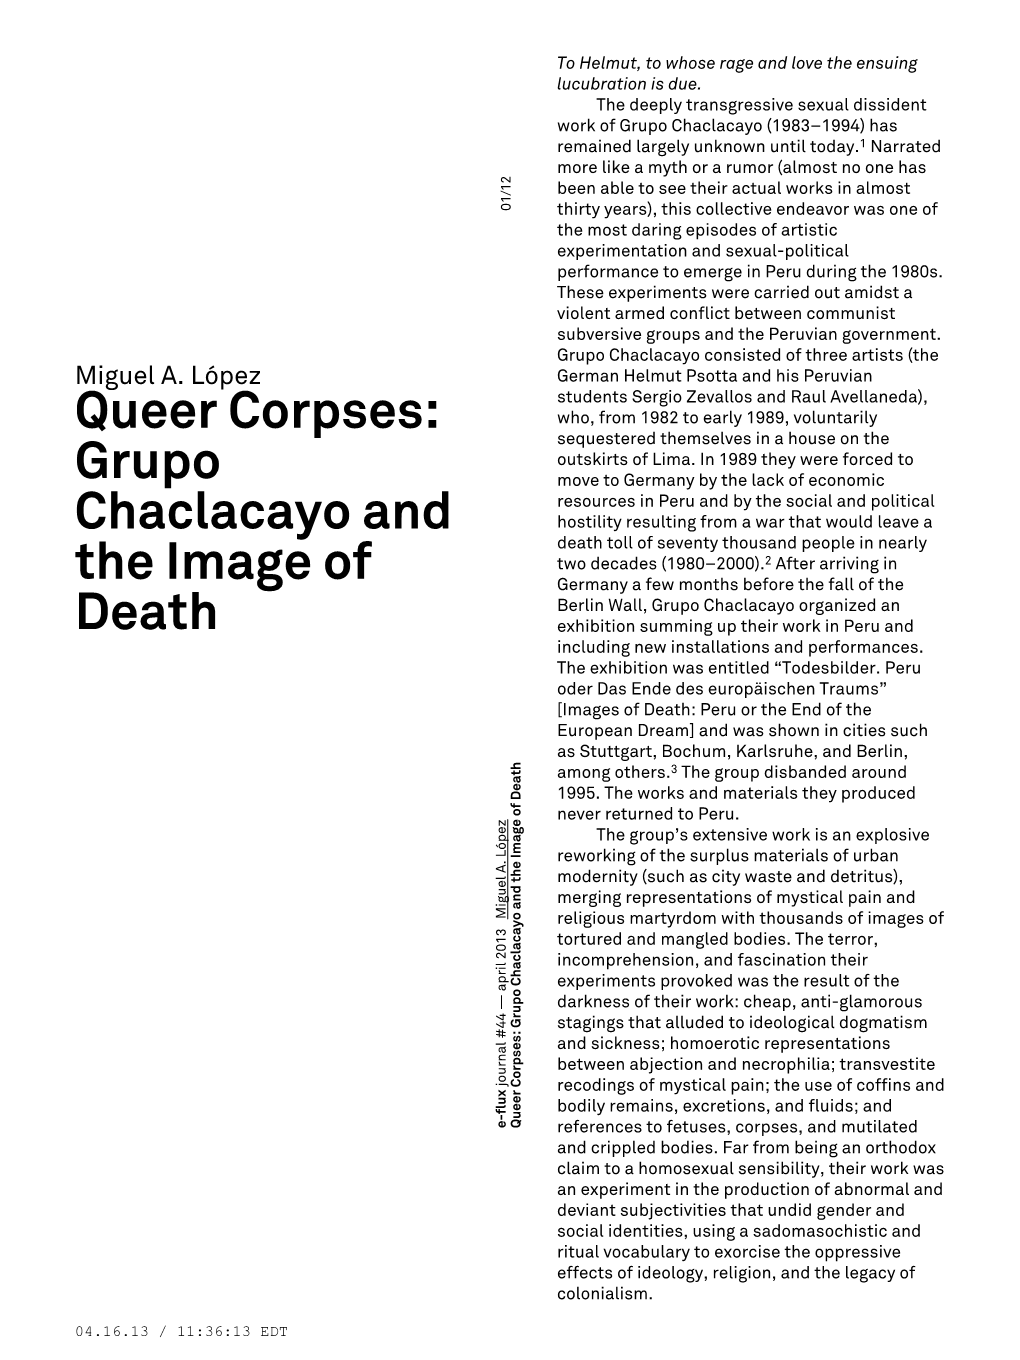 Queer Corpses: Grupo Chaclacayo and the Image of Death